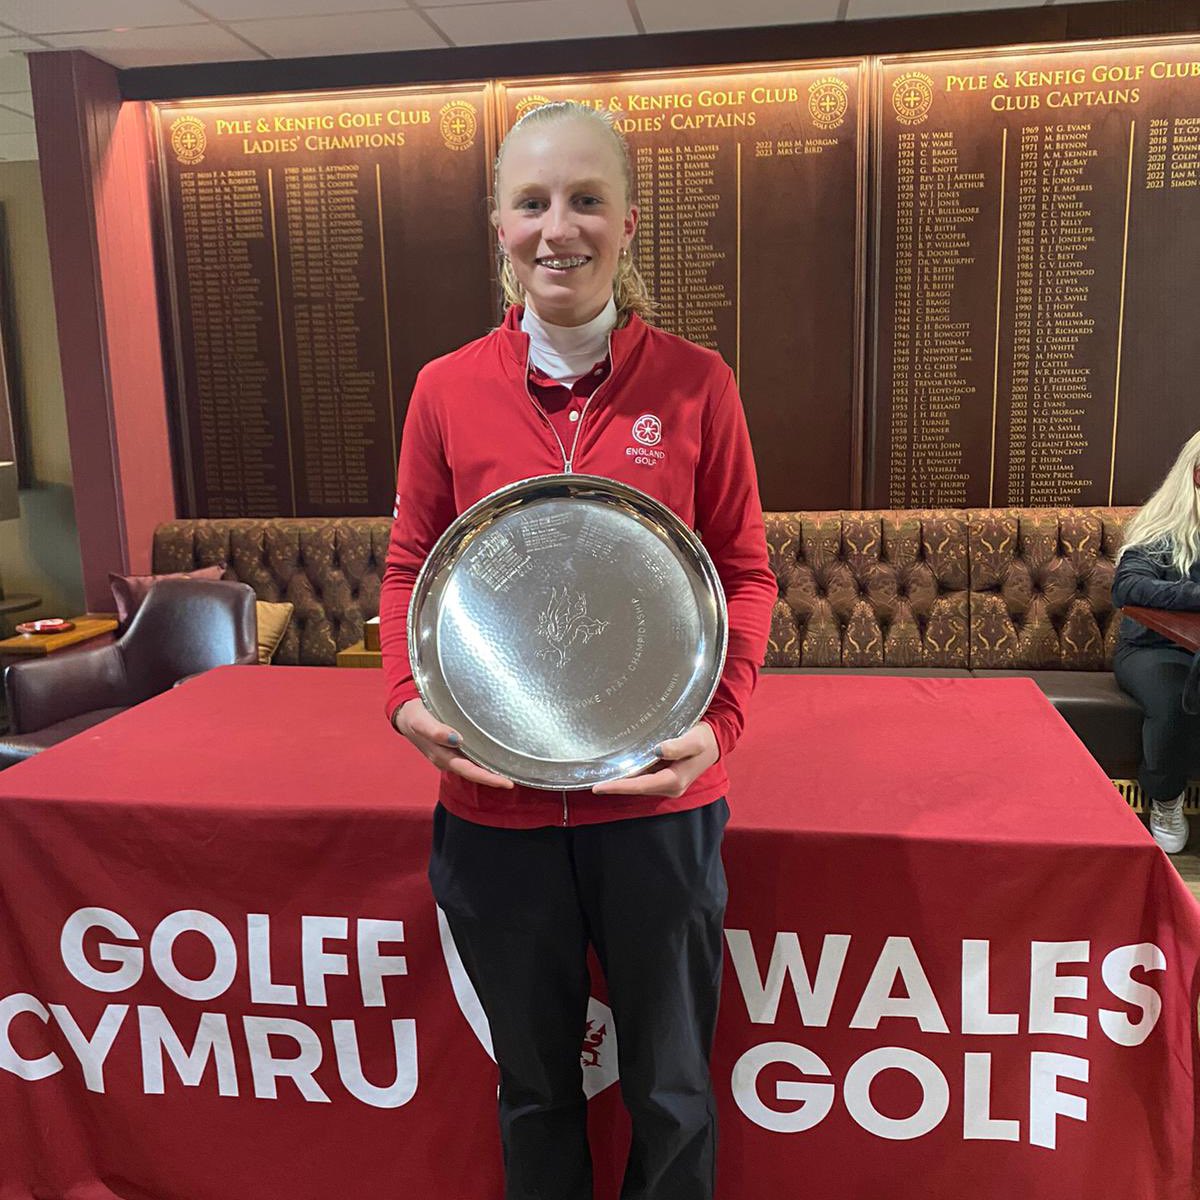 𝗡𝗼 𝘀𝘁𝗼𝗽𝗽𝗶𝗻𝗴 𝗡𝗲𝗹𝗹𝗶𝗲! 🏆📸🏴󠁧󠁢󠁥󠁮󠁧󠁿 Nellie Ong (-11) is crowned the 2024 Welsh Women’s Open Stroke Play Champion after a stunning bogey-free final round of 67 (-7) 👏👏👏 An outstanding performance! 🤩 Results: golfgenius.com/pages/99842779… #RespectInGolf #TogetherInGolf